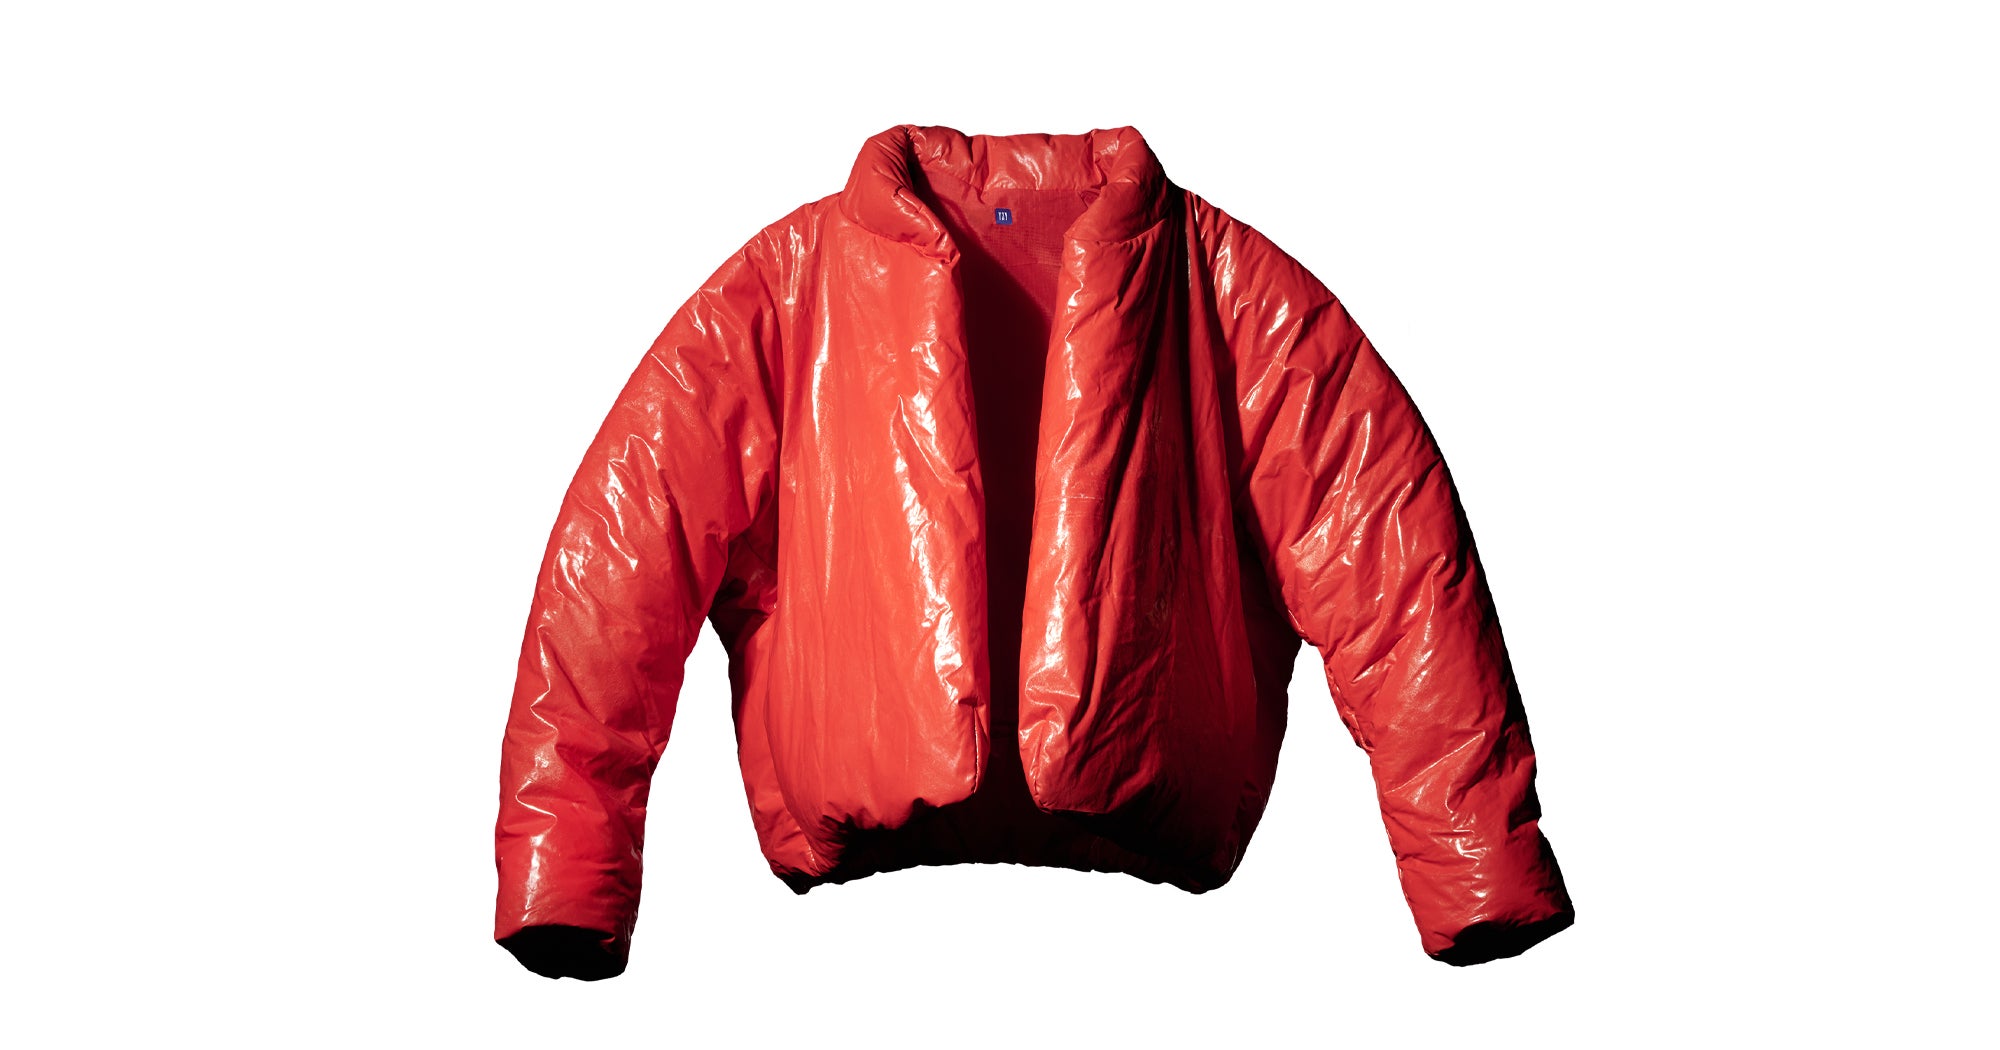 Yeezy Gap Collab Releases Red Puffer Jacket Preorder